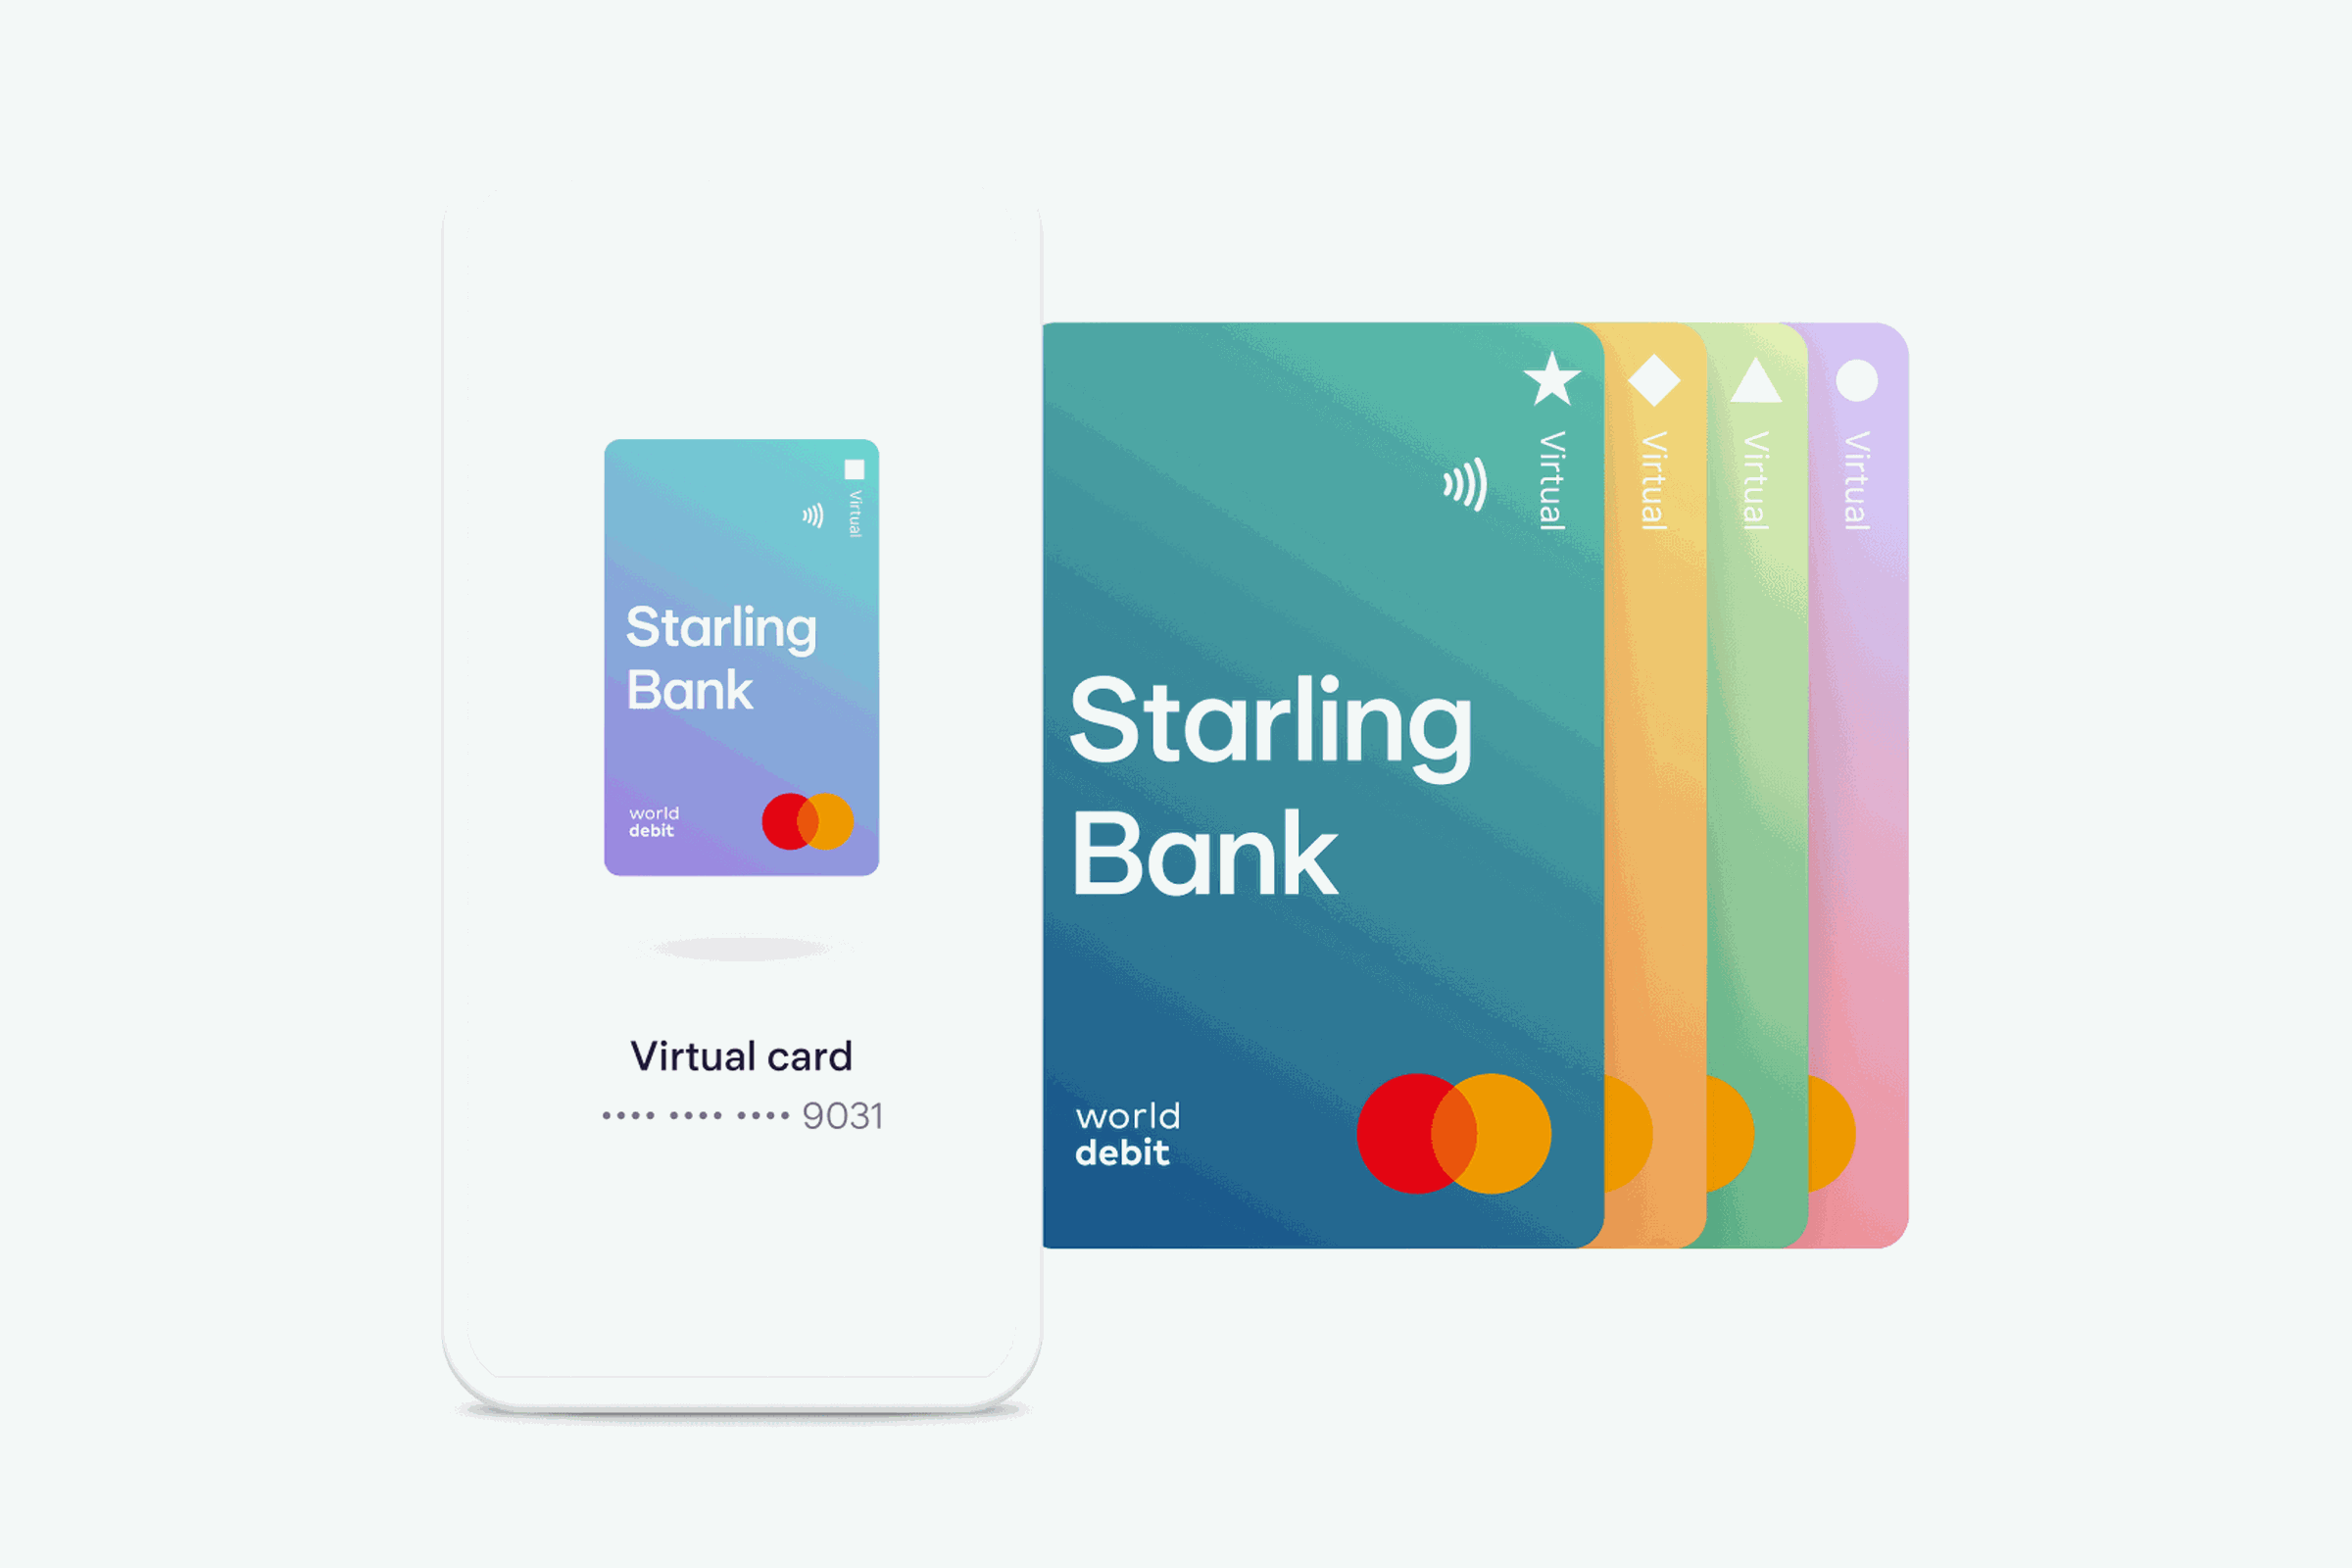 Starling Bank has new virtual cards in a variety of colors